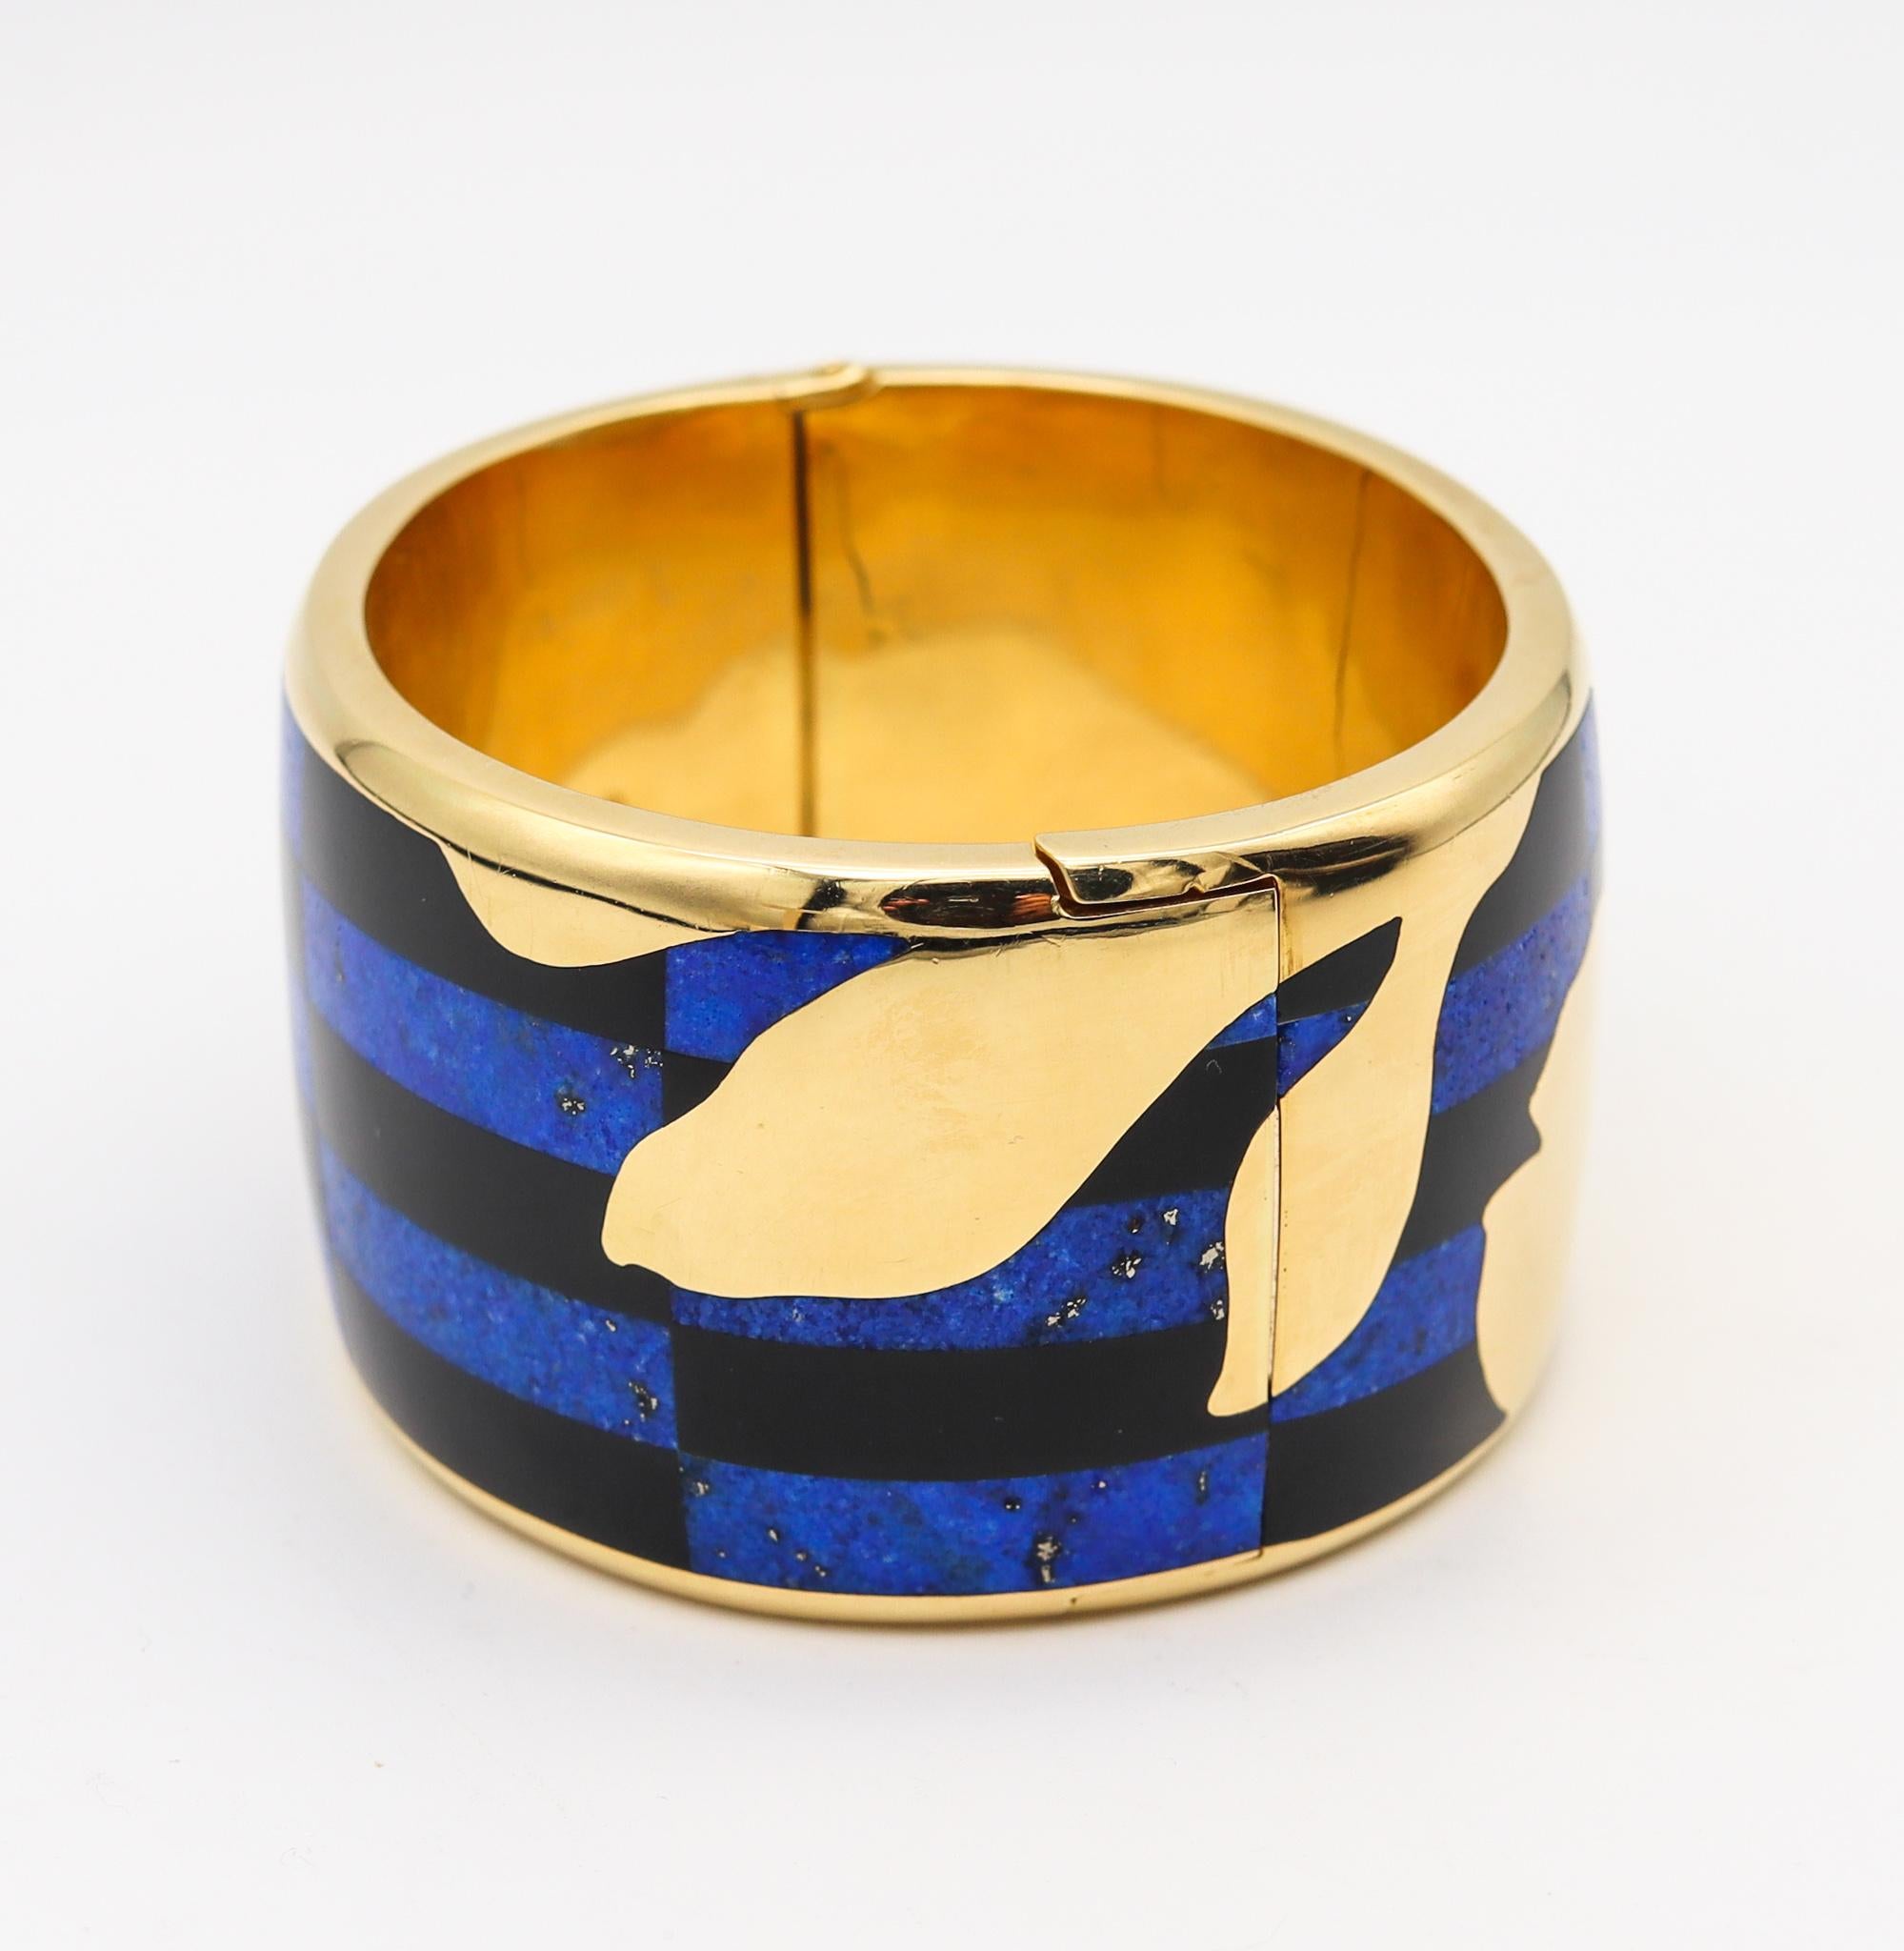 Tiffany & Co 1977 Angela Cummings Geometric Orchids Bangle in 18kt Jade & Lapis In Excellent Condition For Sale In Miami, FL